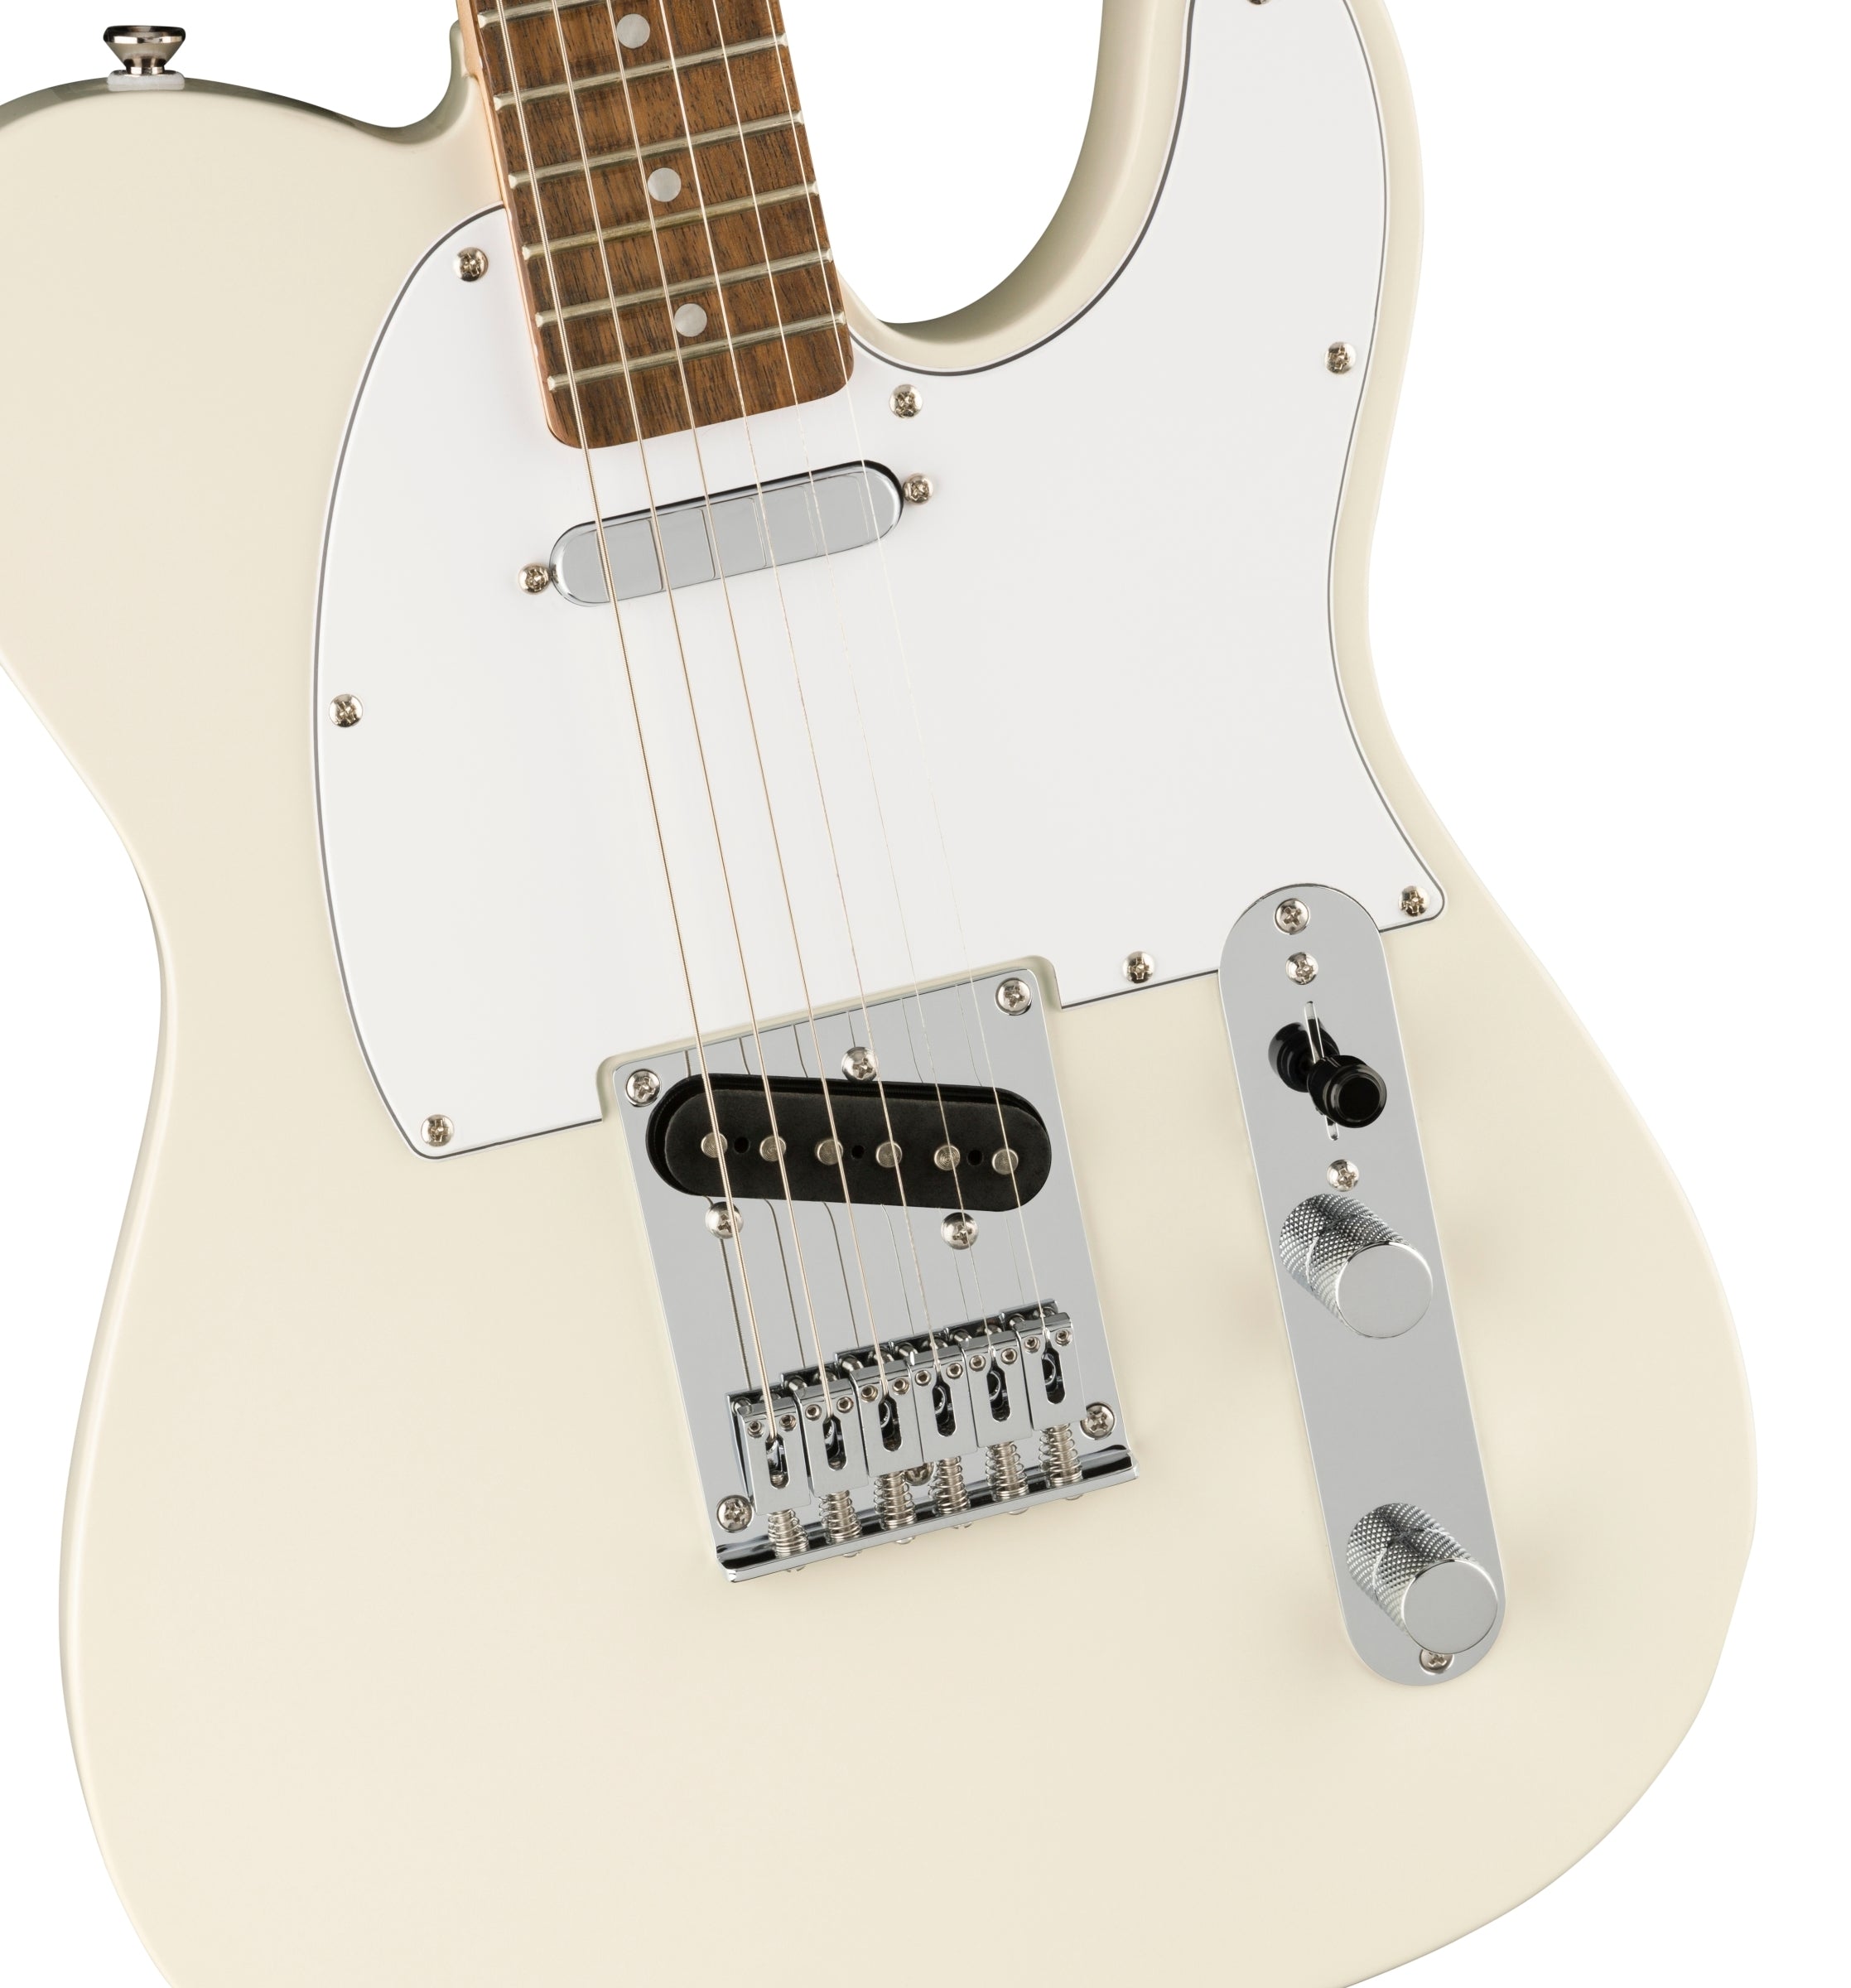 Squier Affinity Series Telecaster Electric Guitar - Olympic White